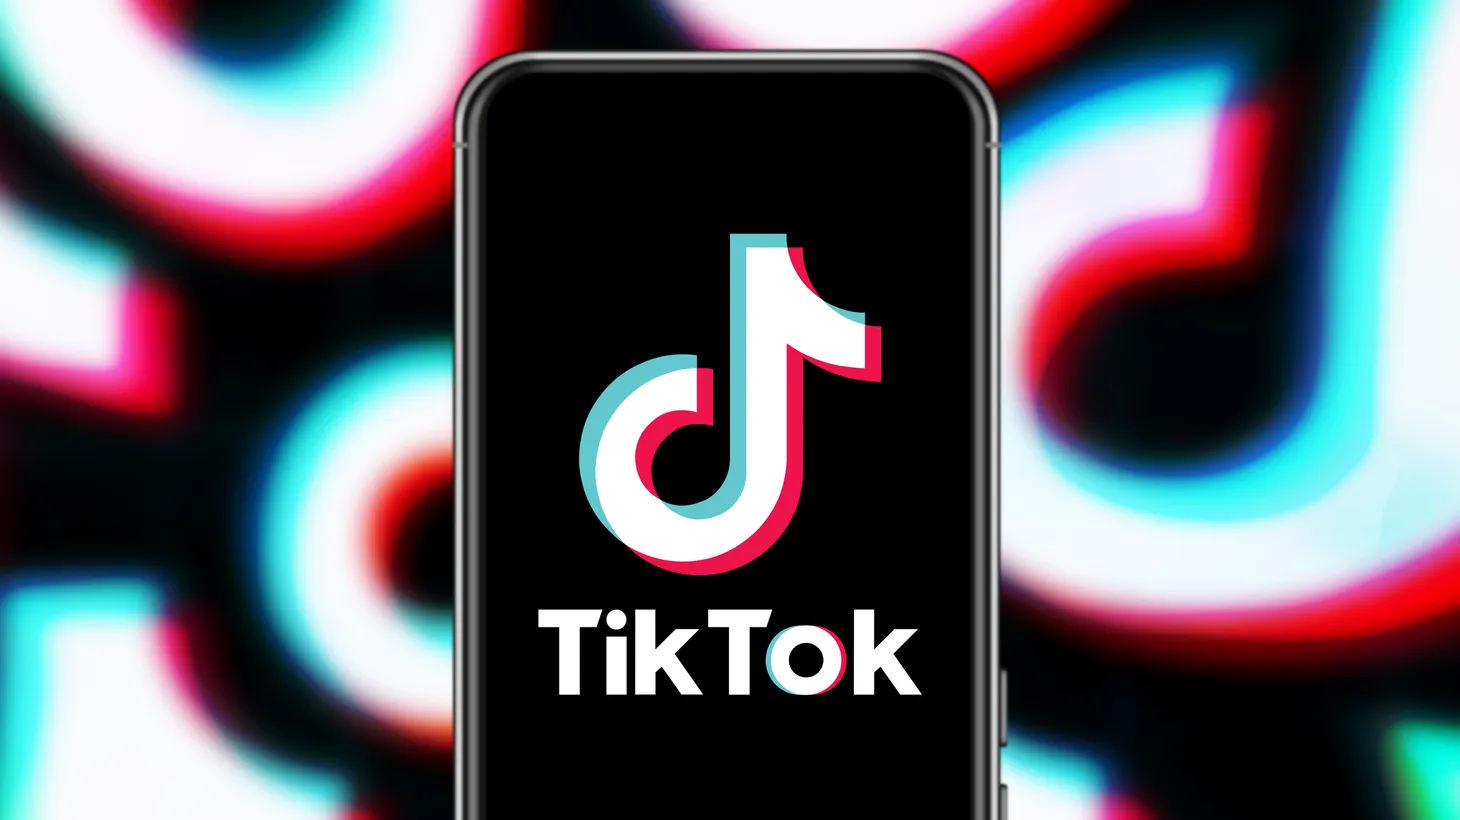 National security issues are surrounding TikTok. If the U.S. bans the social media platform or forces its parent company ByteDance to sell it, would the Biden administration risk alienating a horde of young potential voters in the lead-up to an election year?